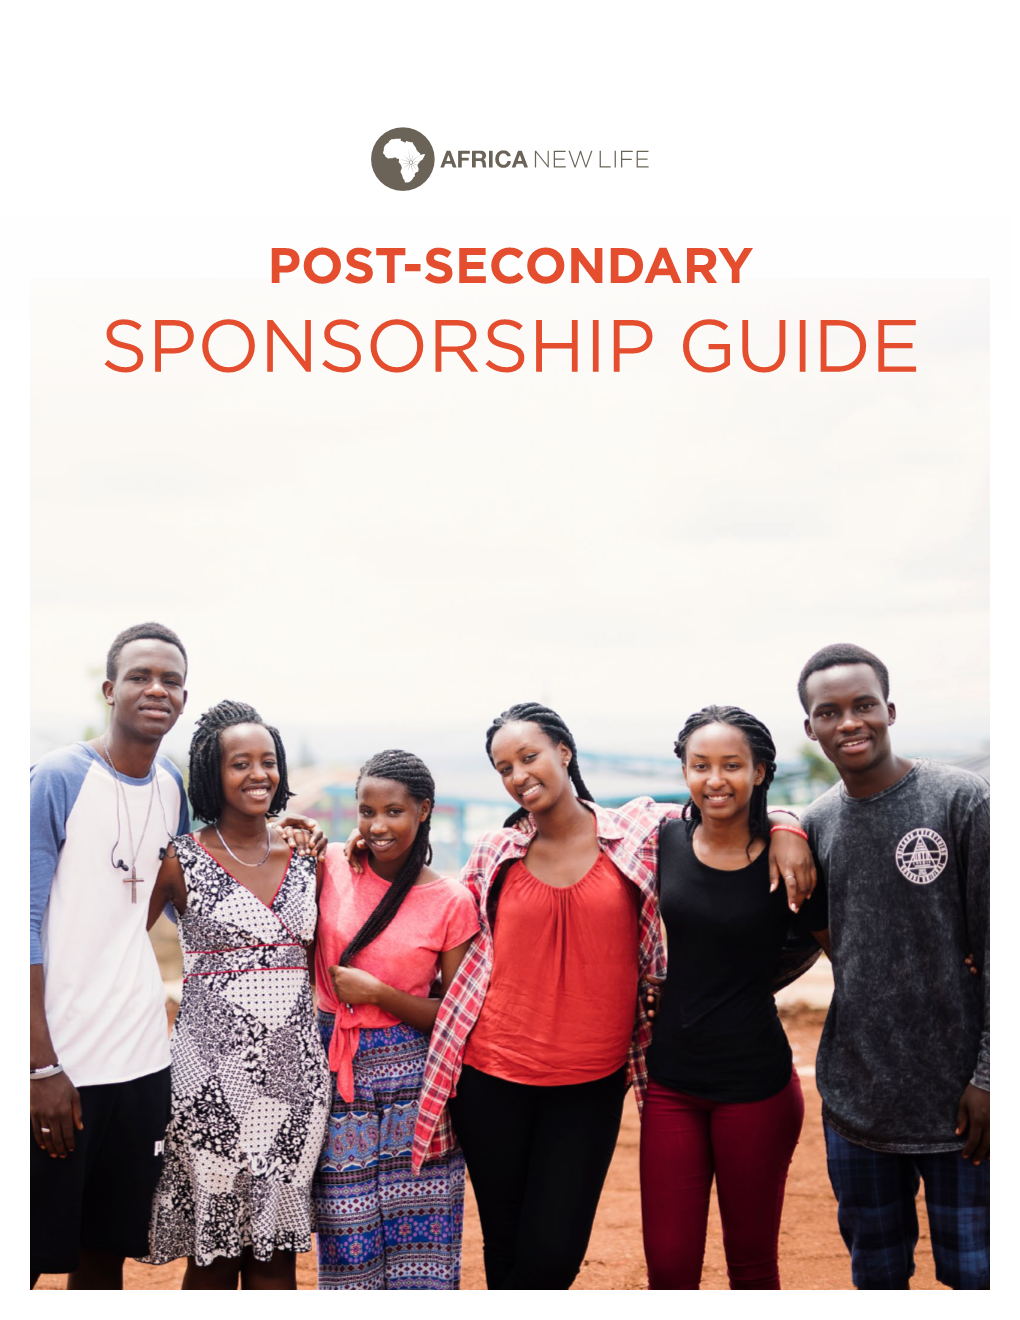 Sponsorship Guide Welcome & Thank You